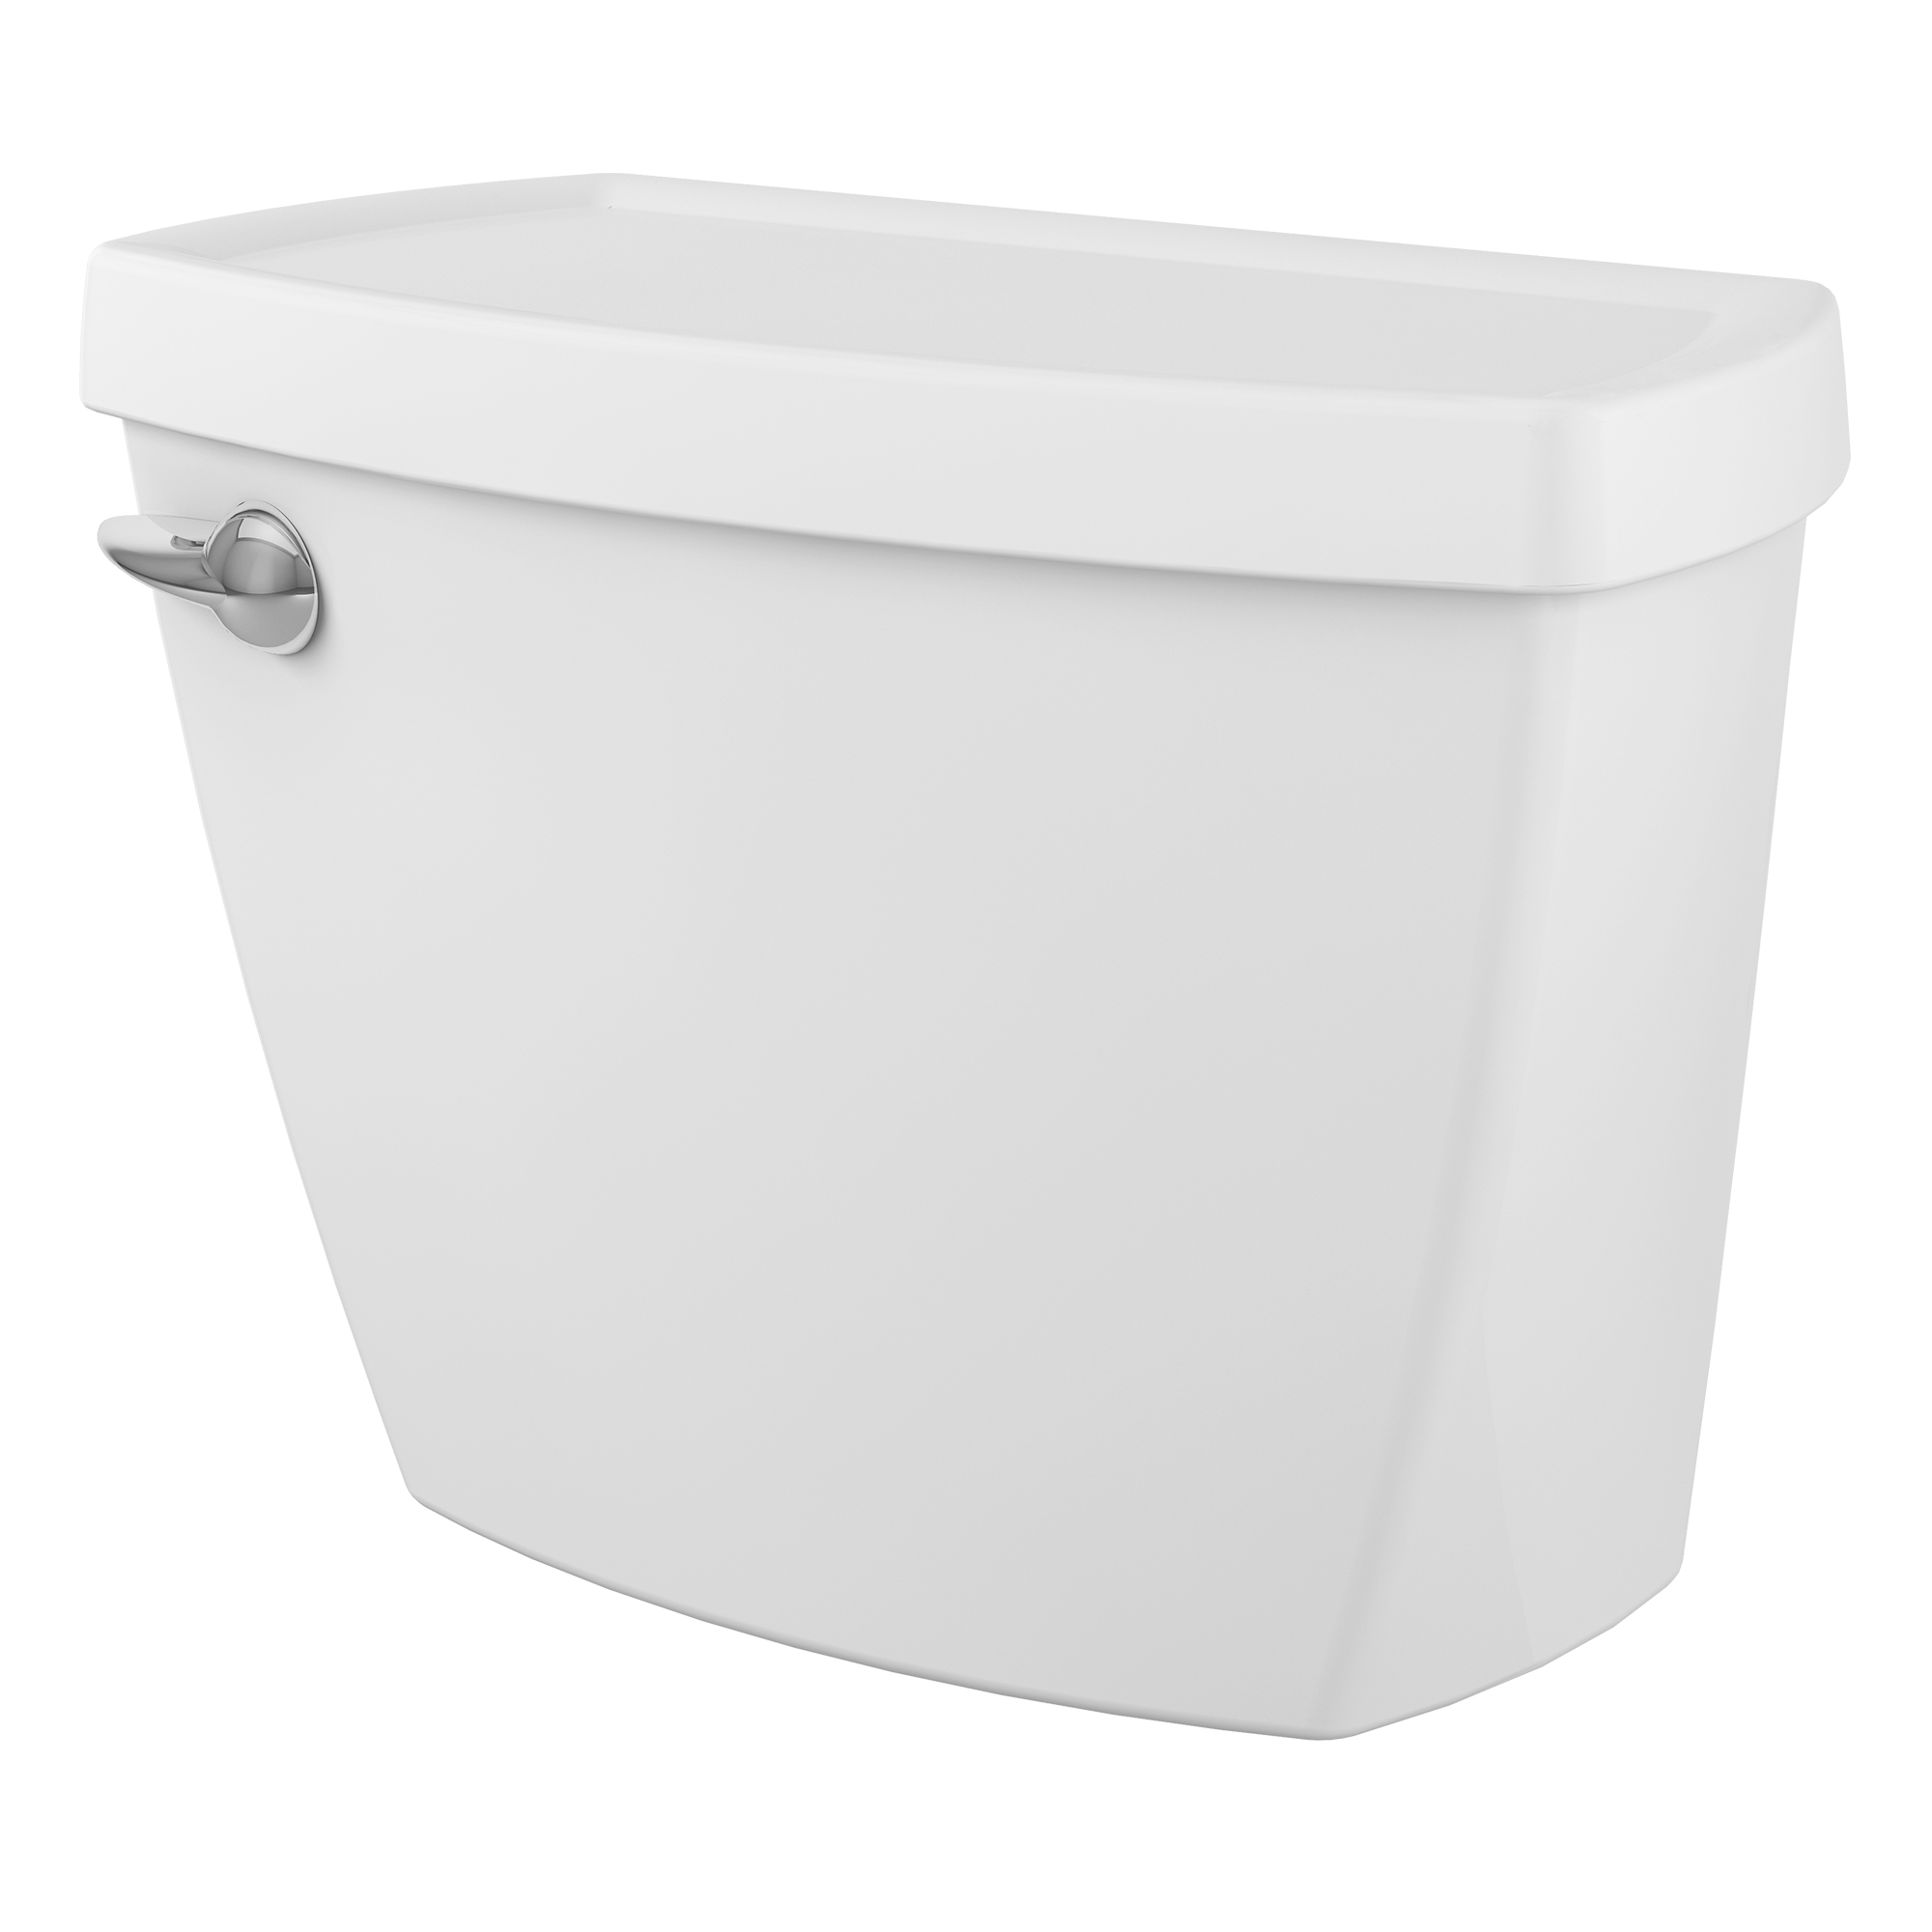 Titan® 12-in. Rough-In 1.6 gpf Lined Toilet Tank